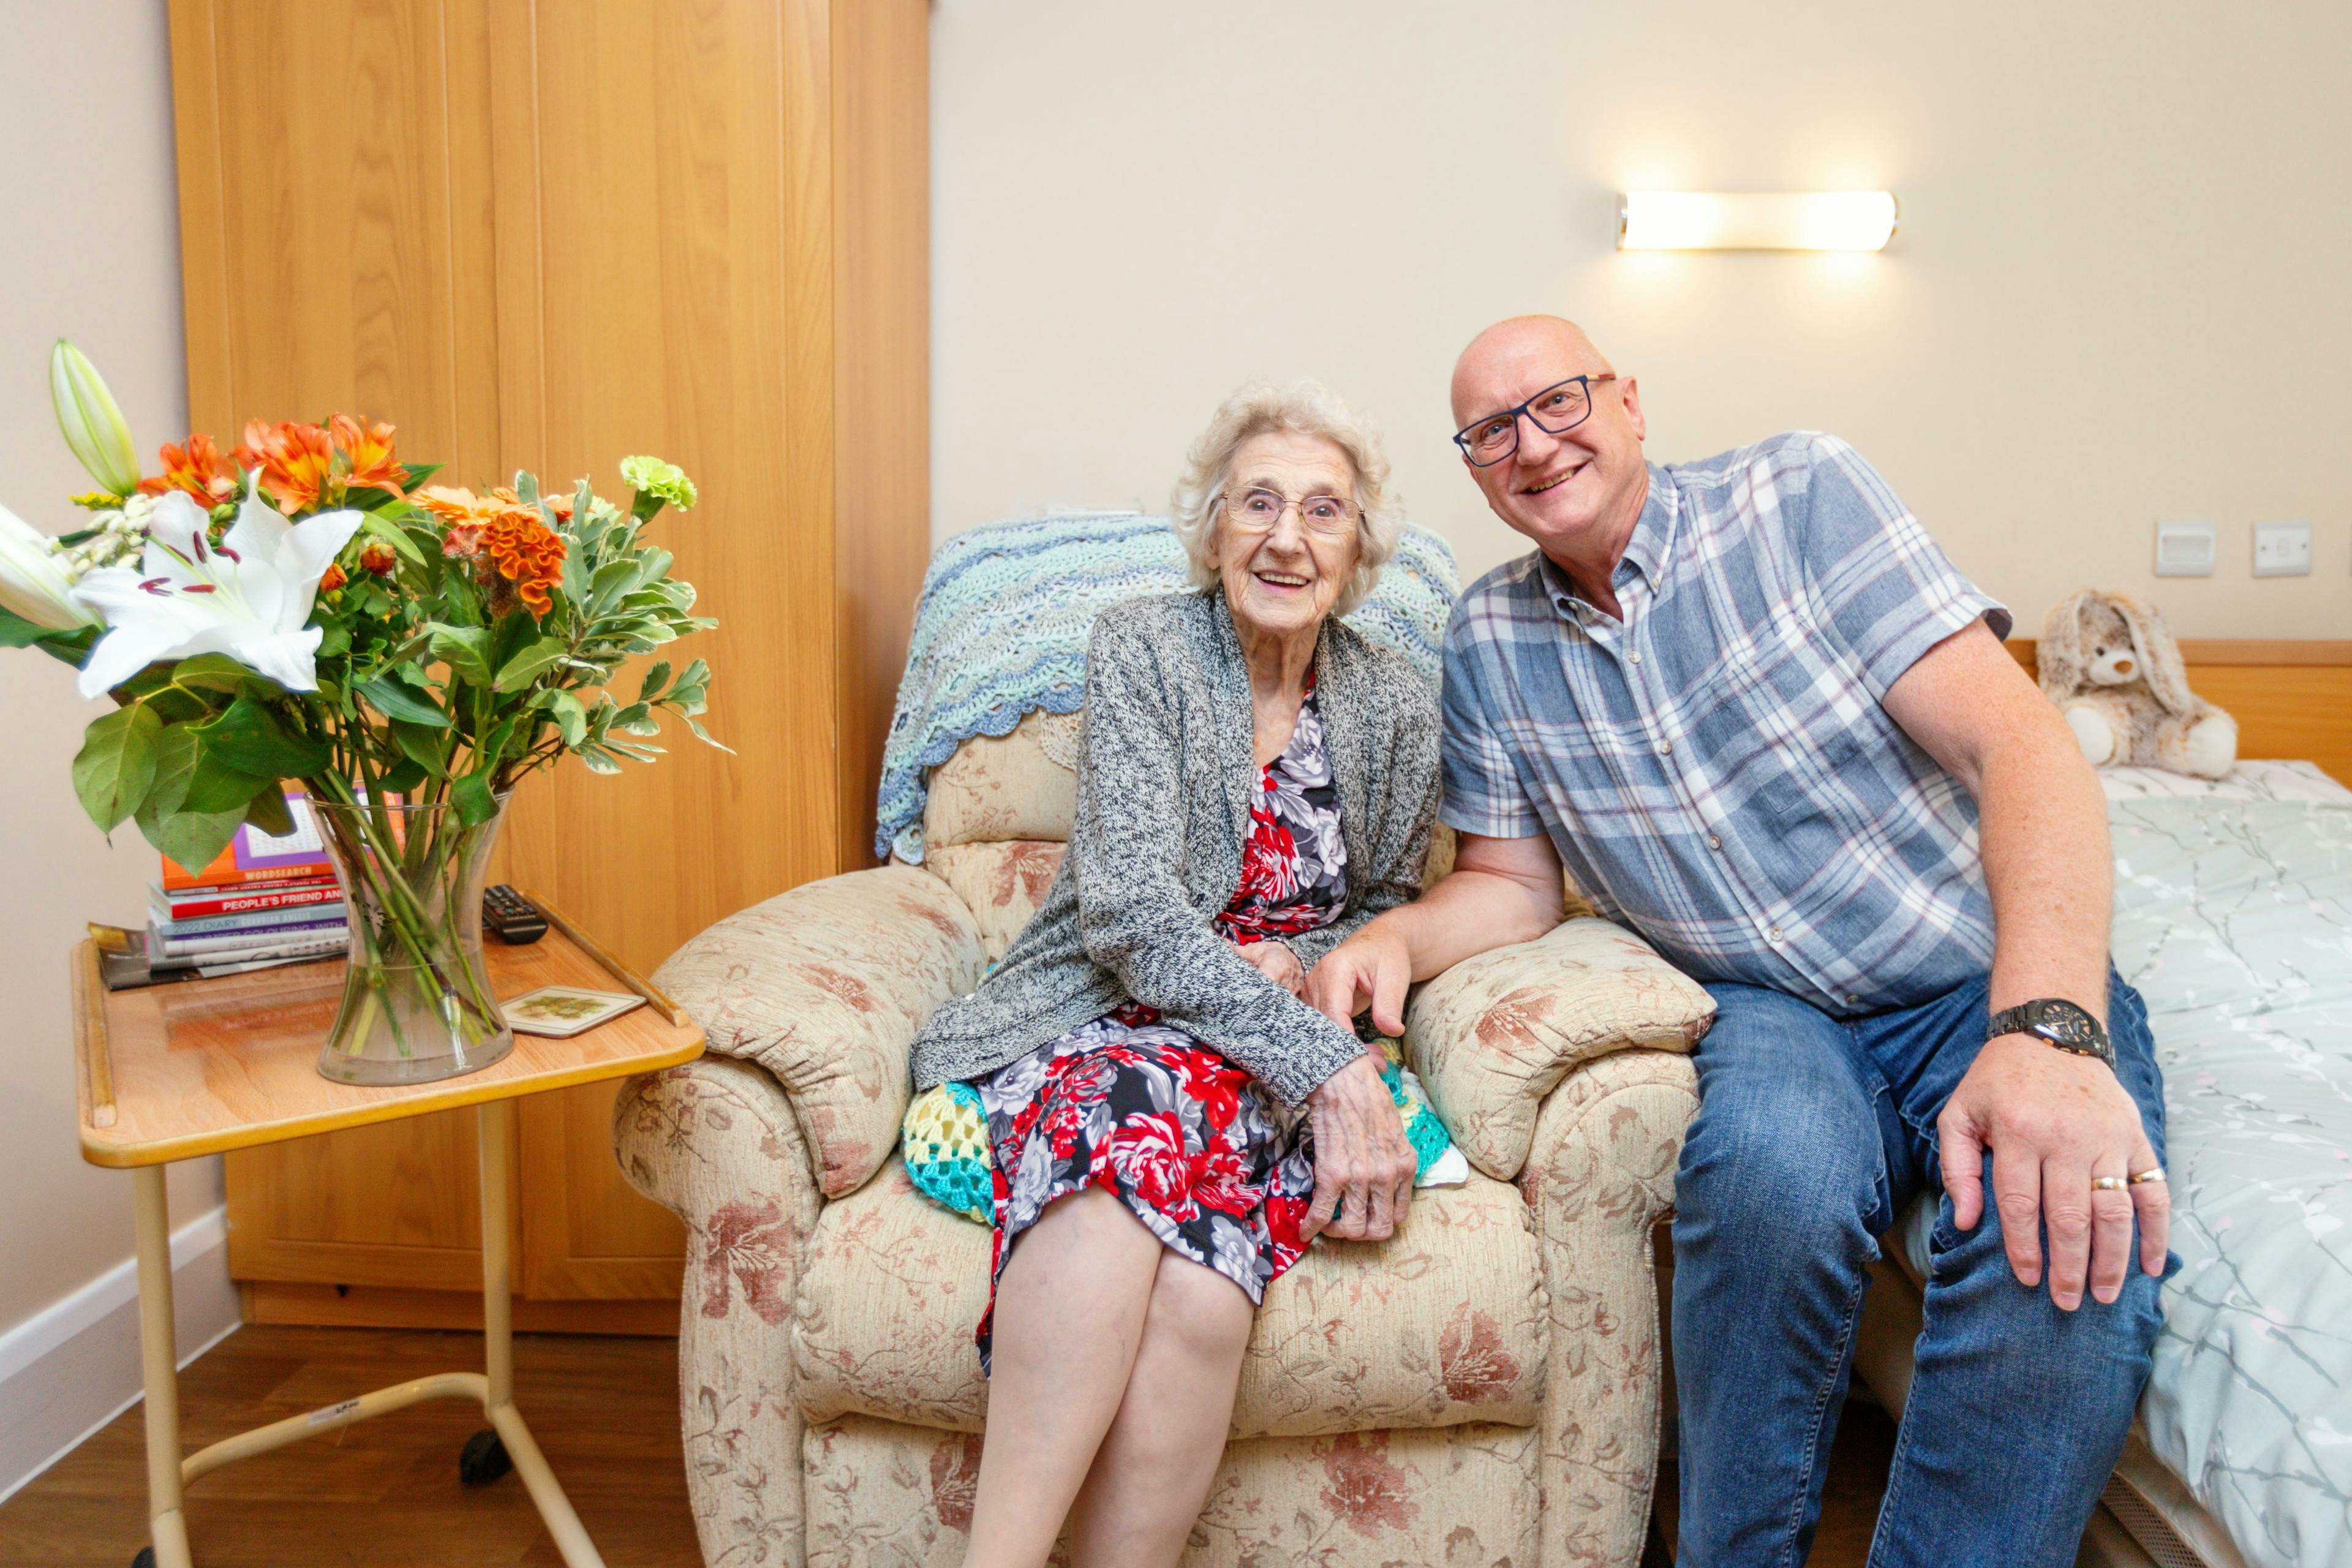 Residents at Glennfield care home in Wisbech, Cambridgeshire